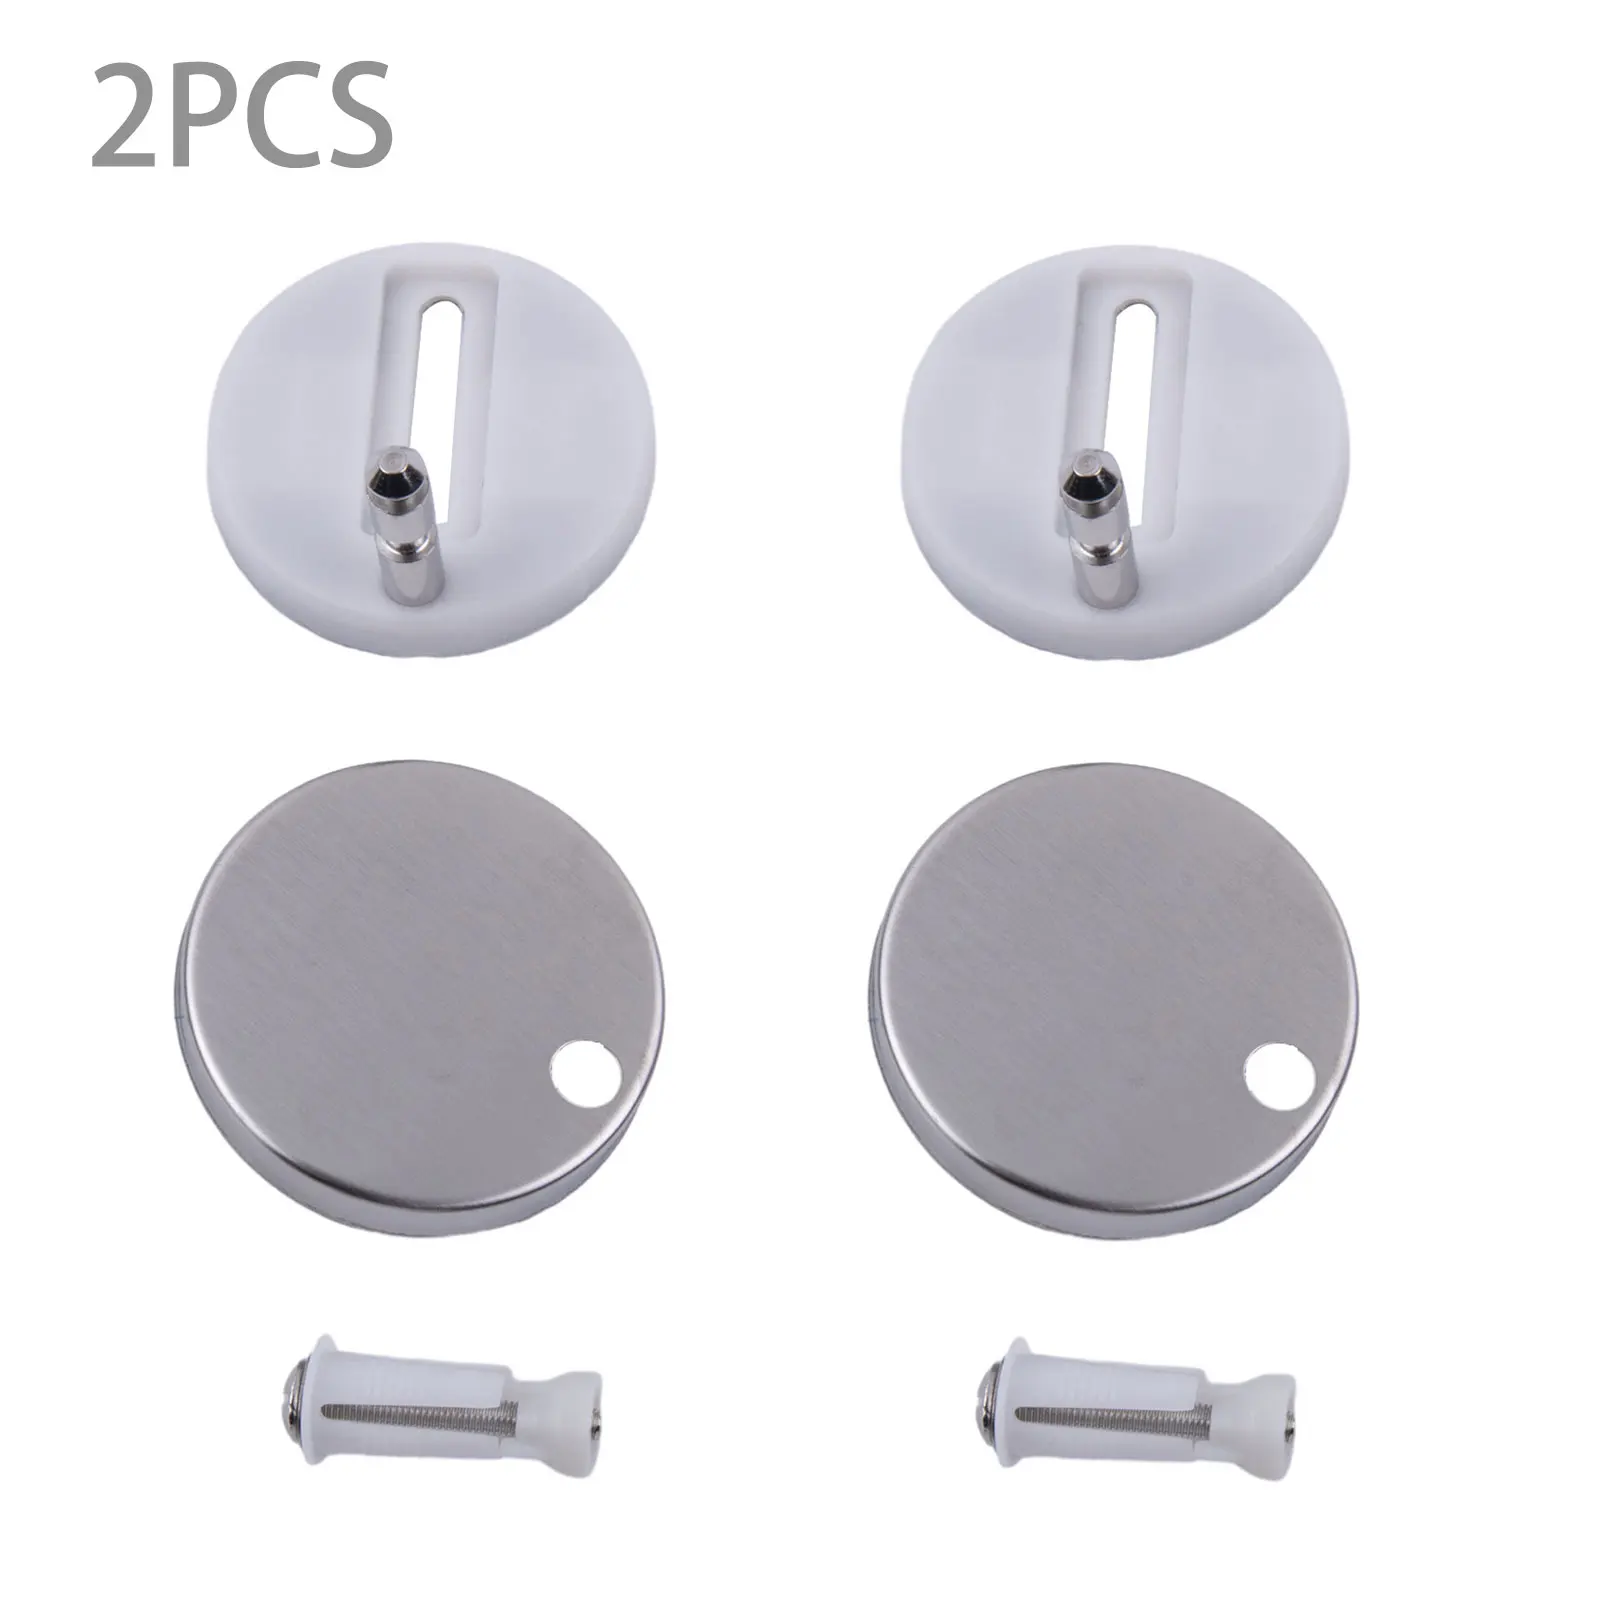 2pcs 45/55/60mm Toilet Lid Hinge Screws For Bathroom Toilet Cover Seat Hinge Connector Fixing Bolts Toilet Hardware Accessories